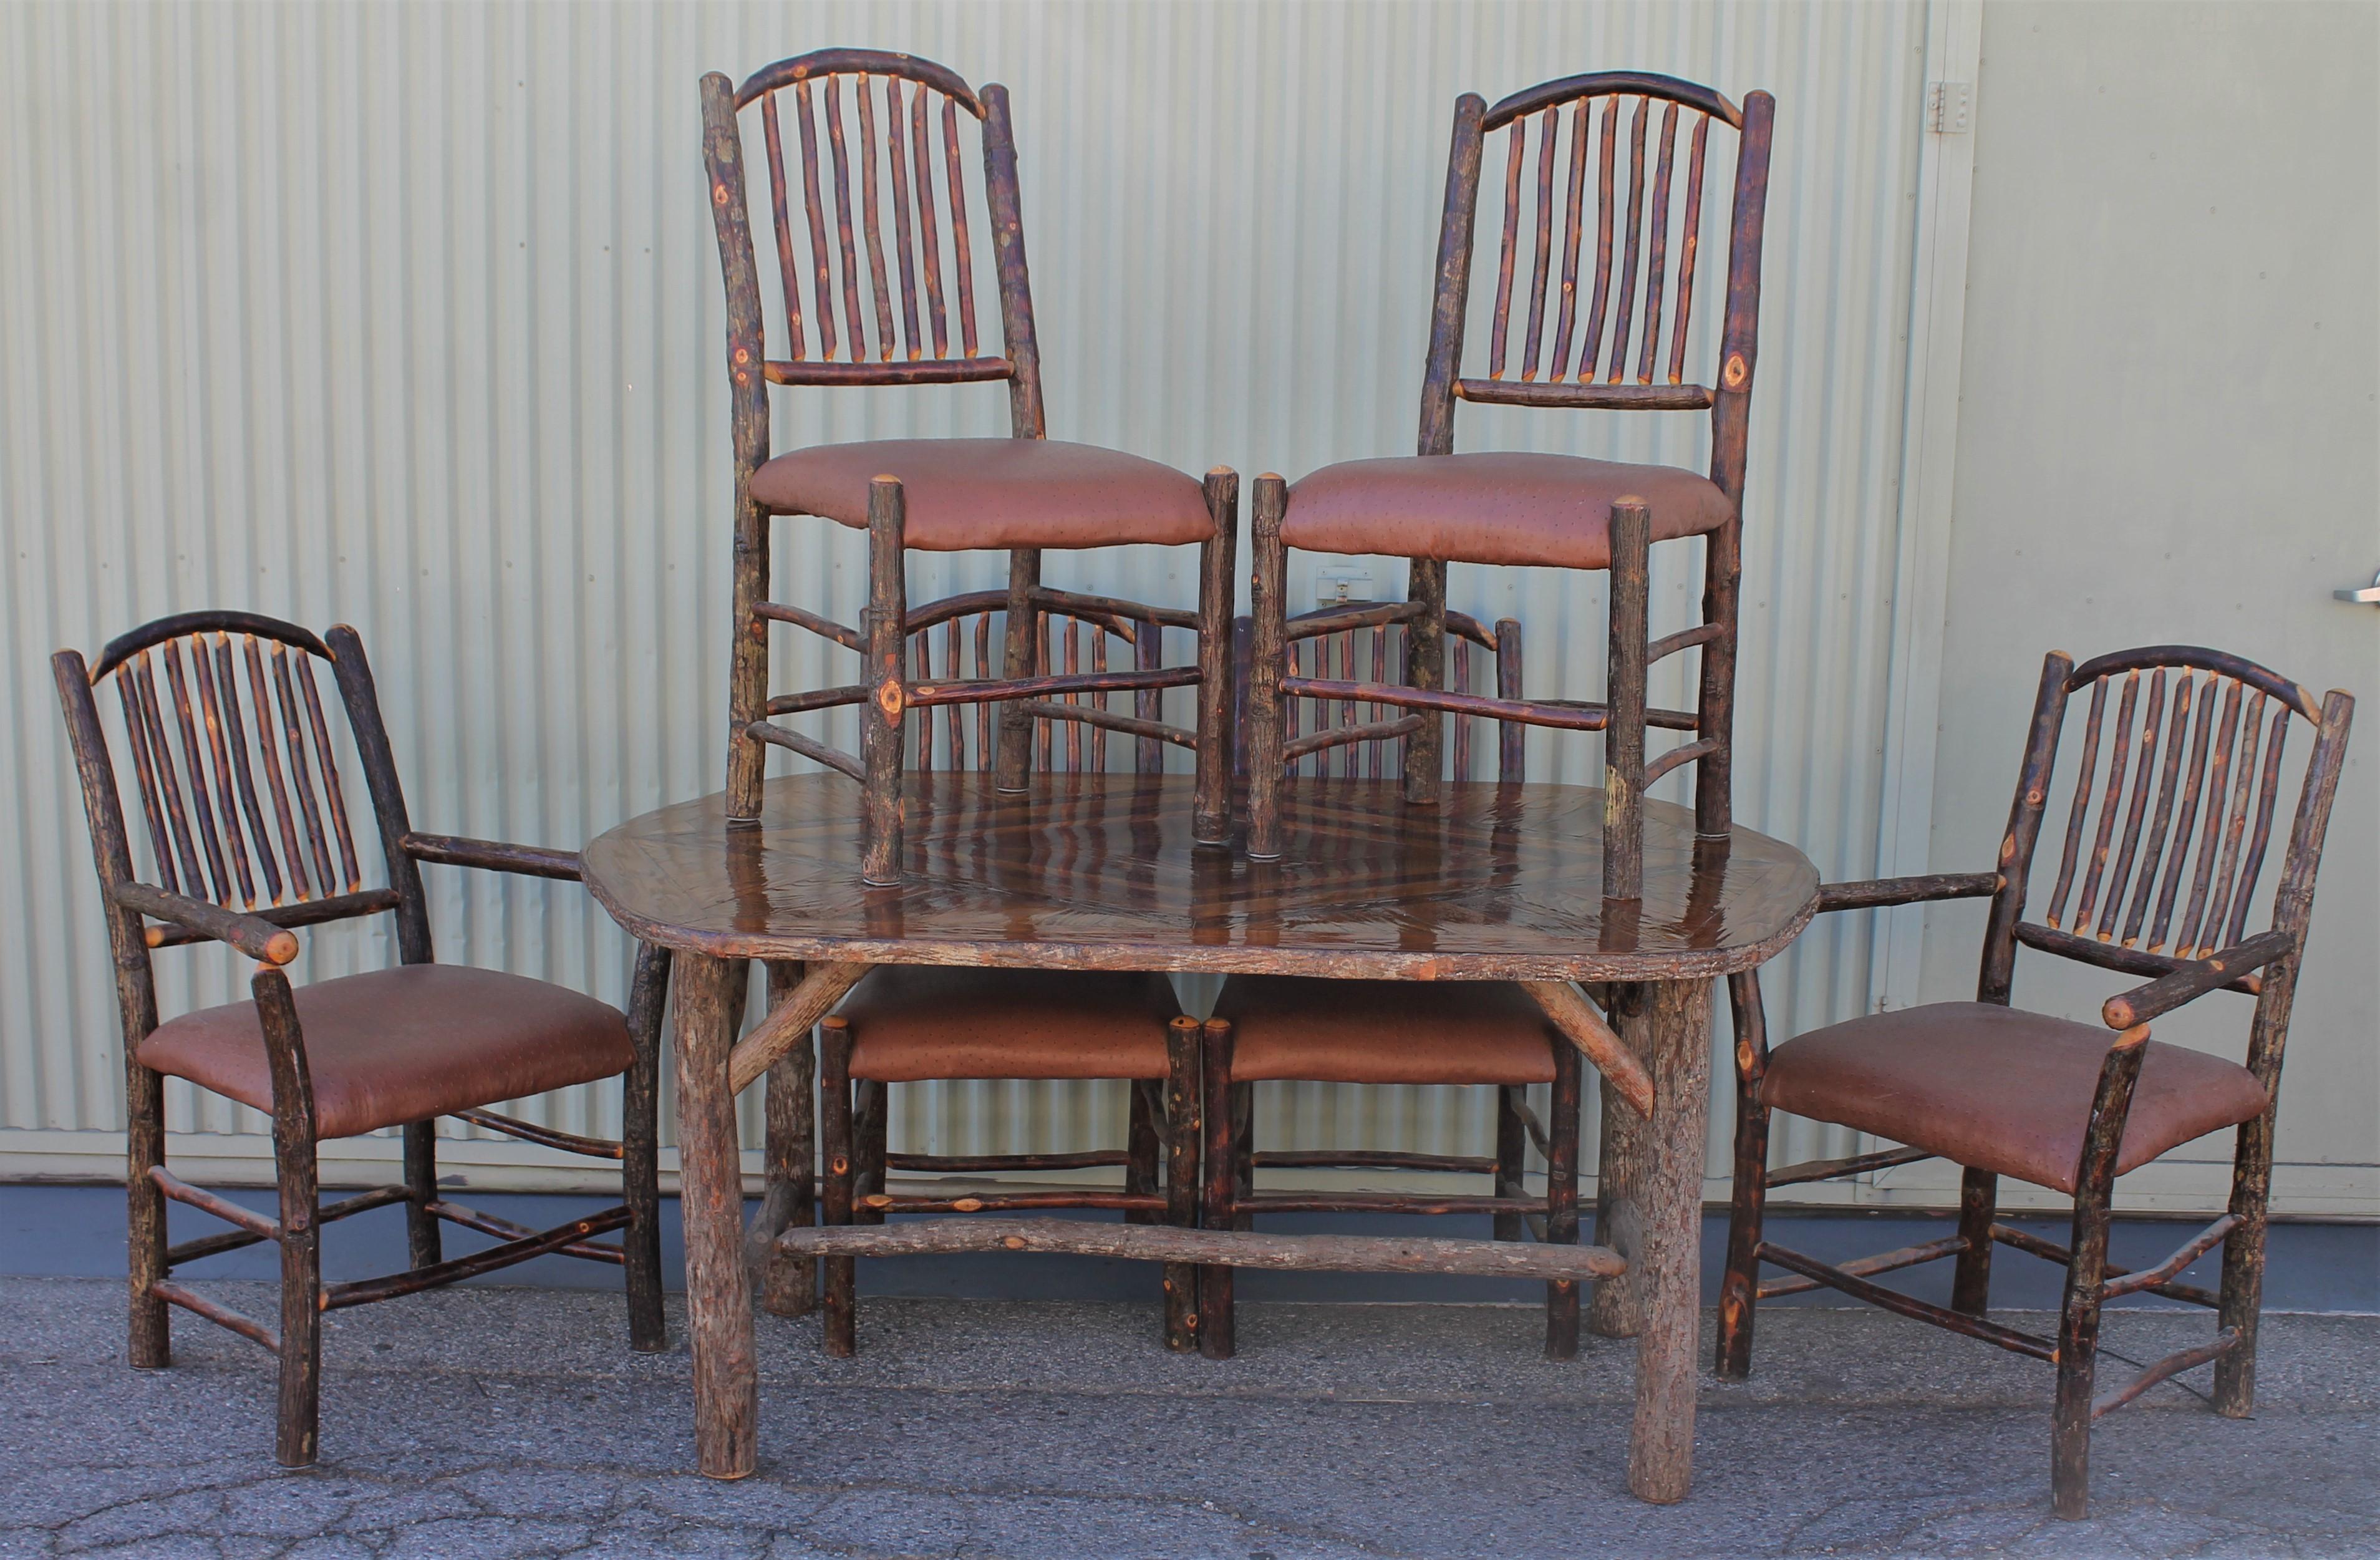 This amazing seven pieces matching chairs and oval table signed Old Hickory. All in very good condition. The tabletop is a marque inlaid top.

Measures: Armchairs 41 x 28 x 28 only on arm chair in stock.

Side chairs 41 x 19 x 19 
Seat height for